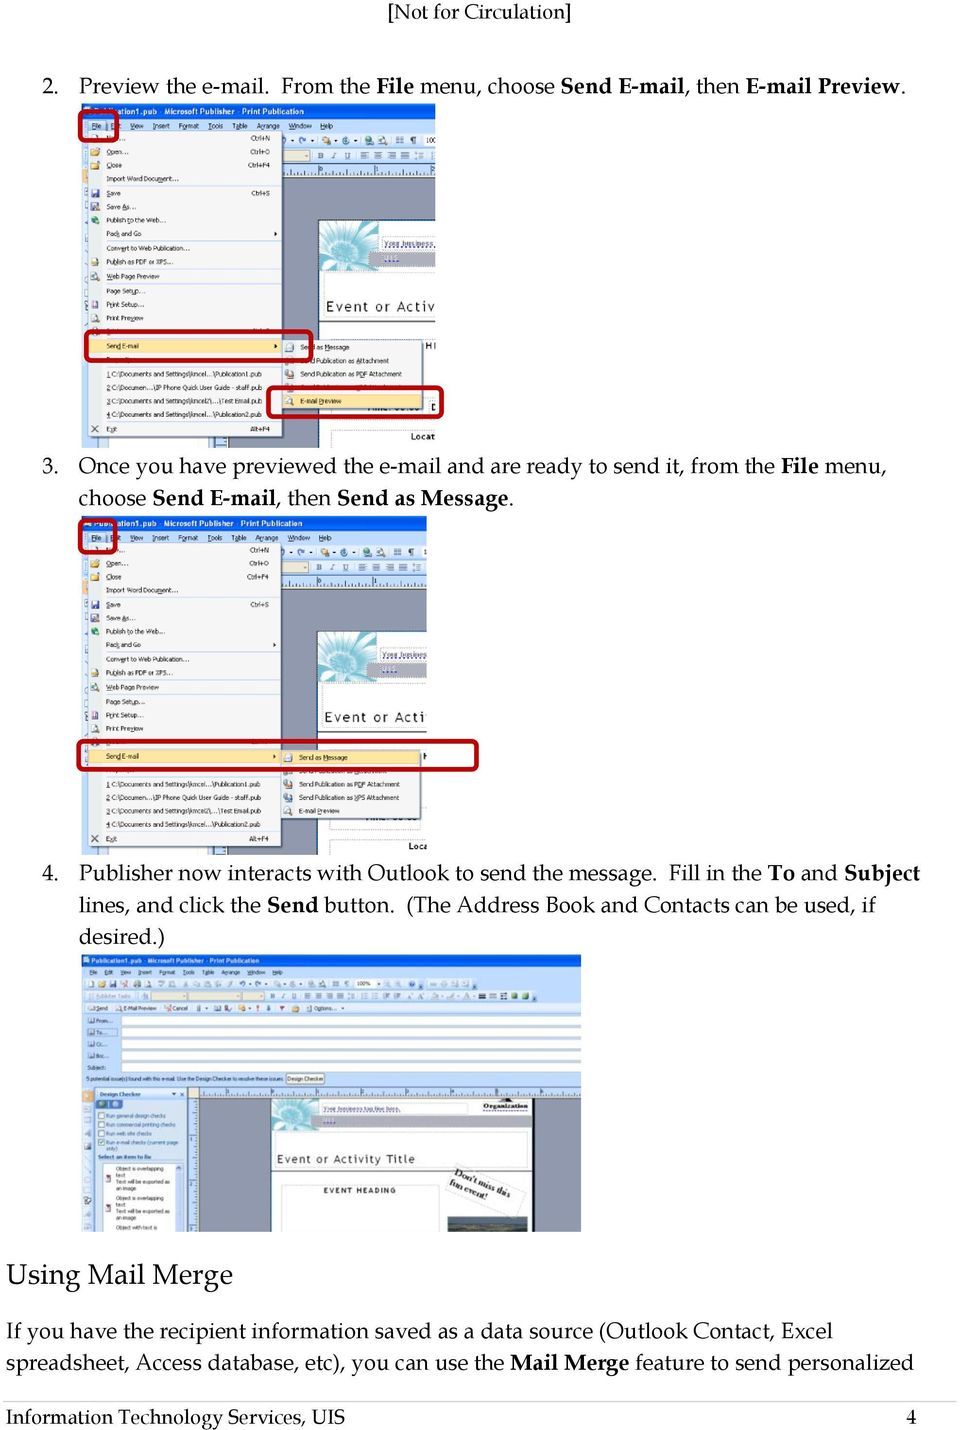 Publisher now interacts with Outlook to send the message. Fill in the To and Subject lines, and click the Send button.